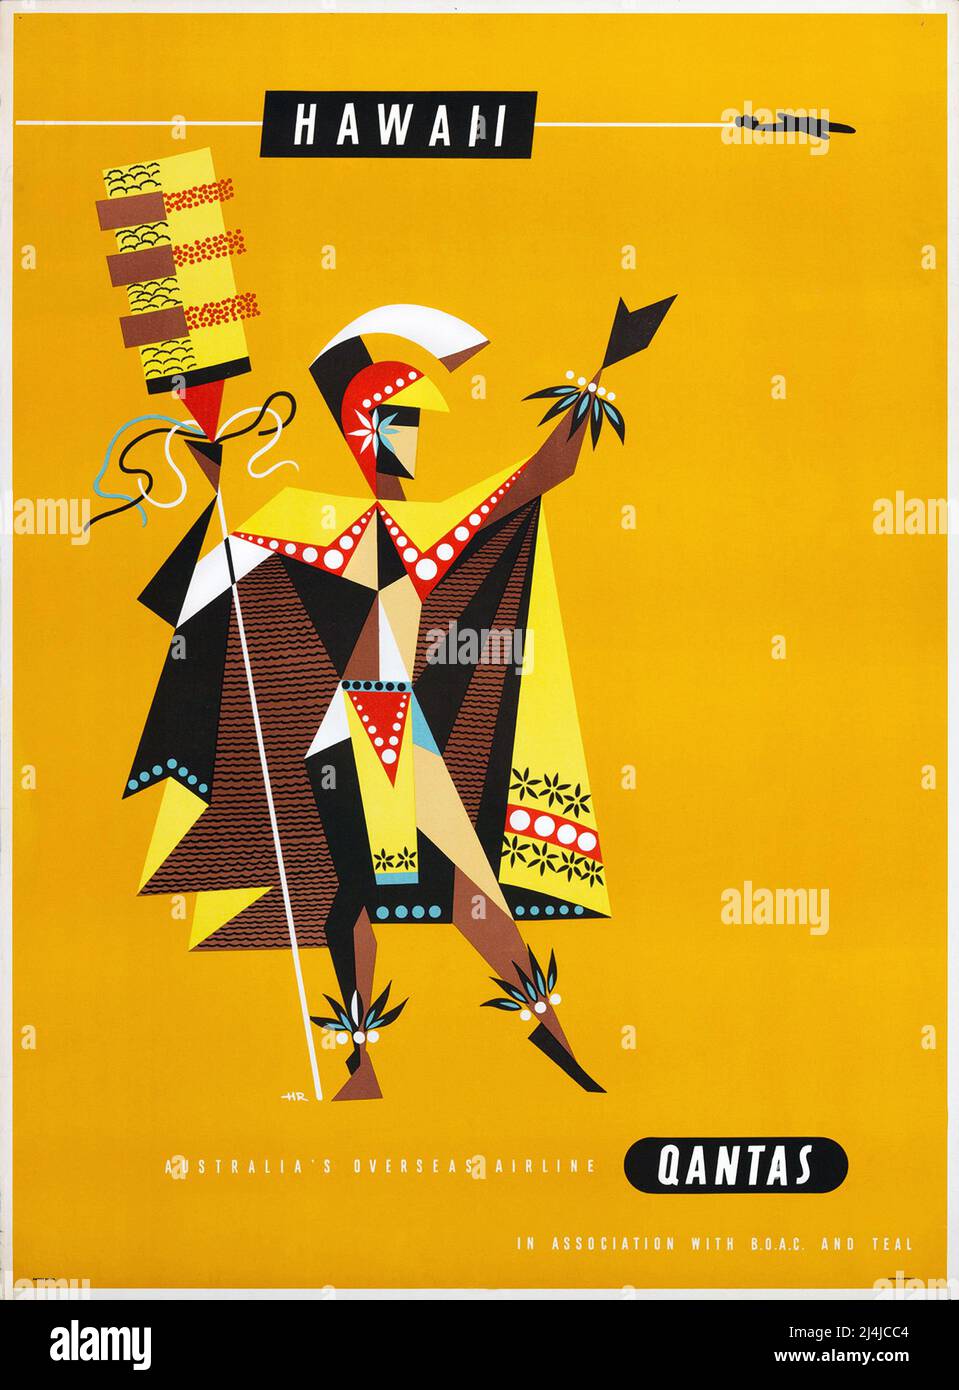 Vintage Travel Poster - Qantas - Hawaii , By Harry Rogers Stock Photo